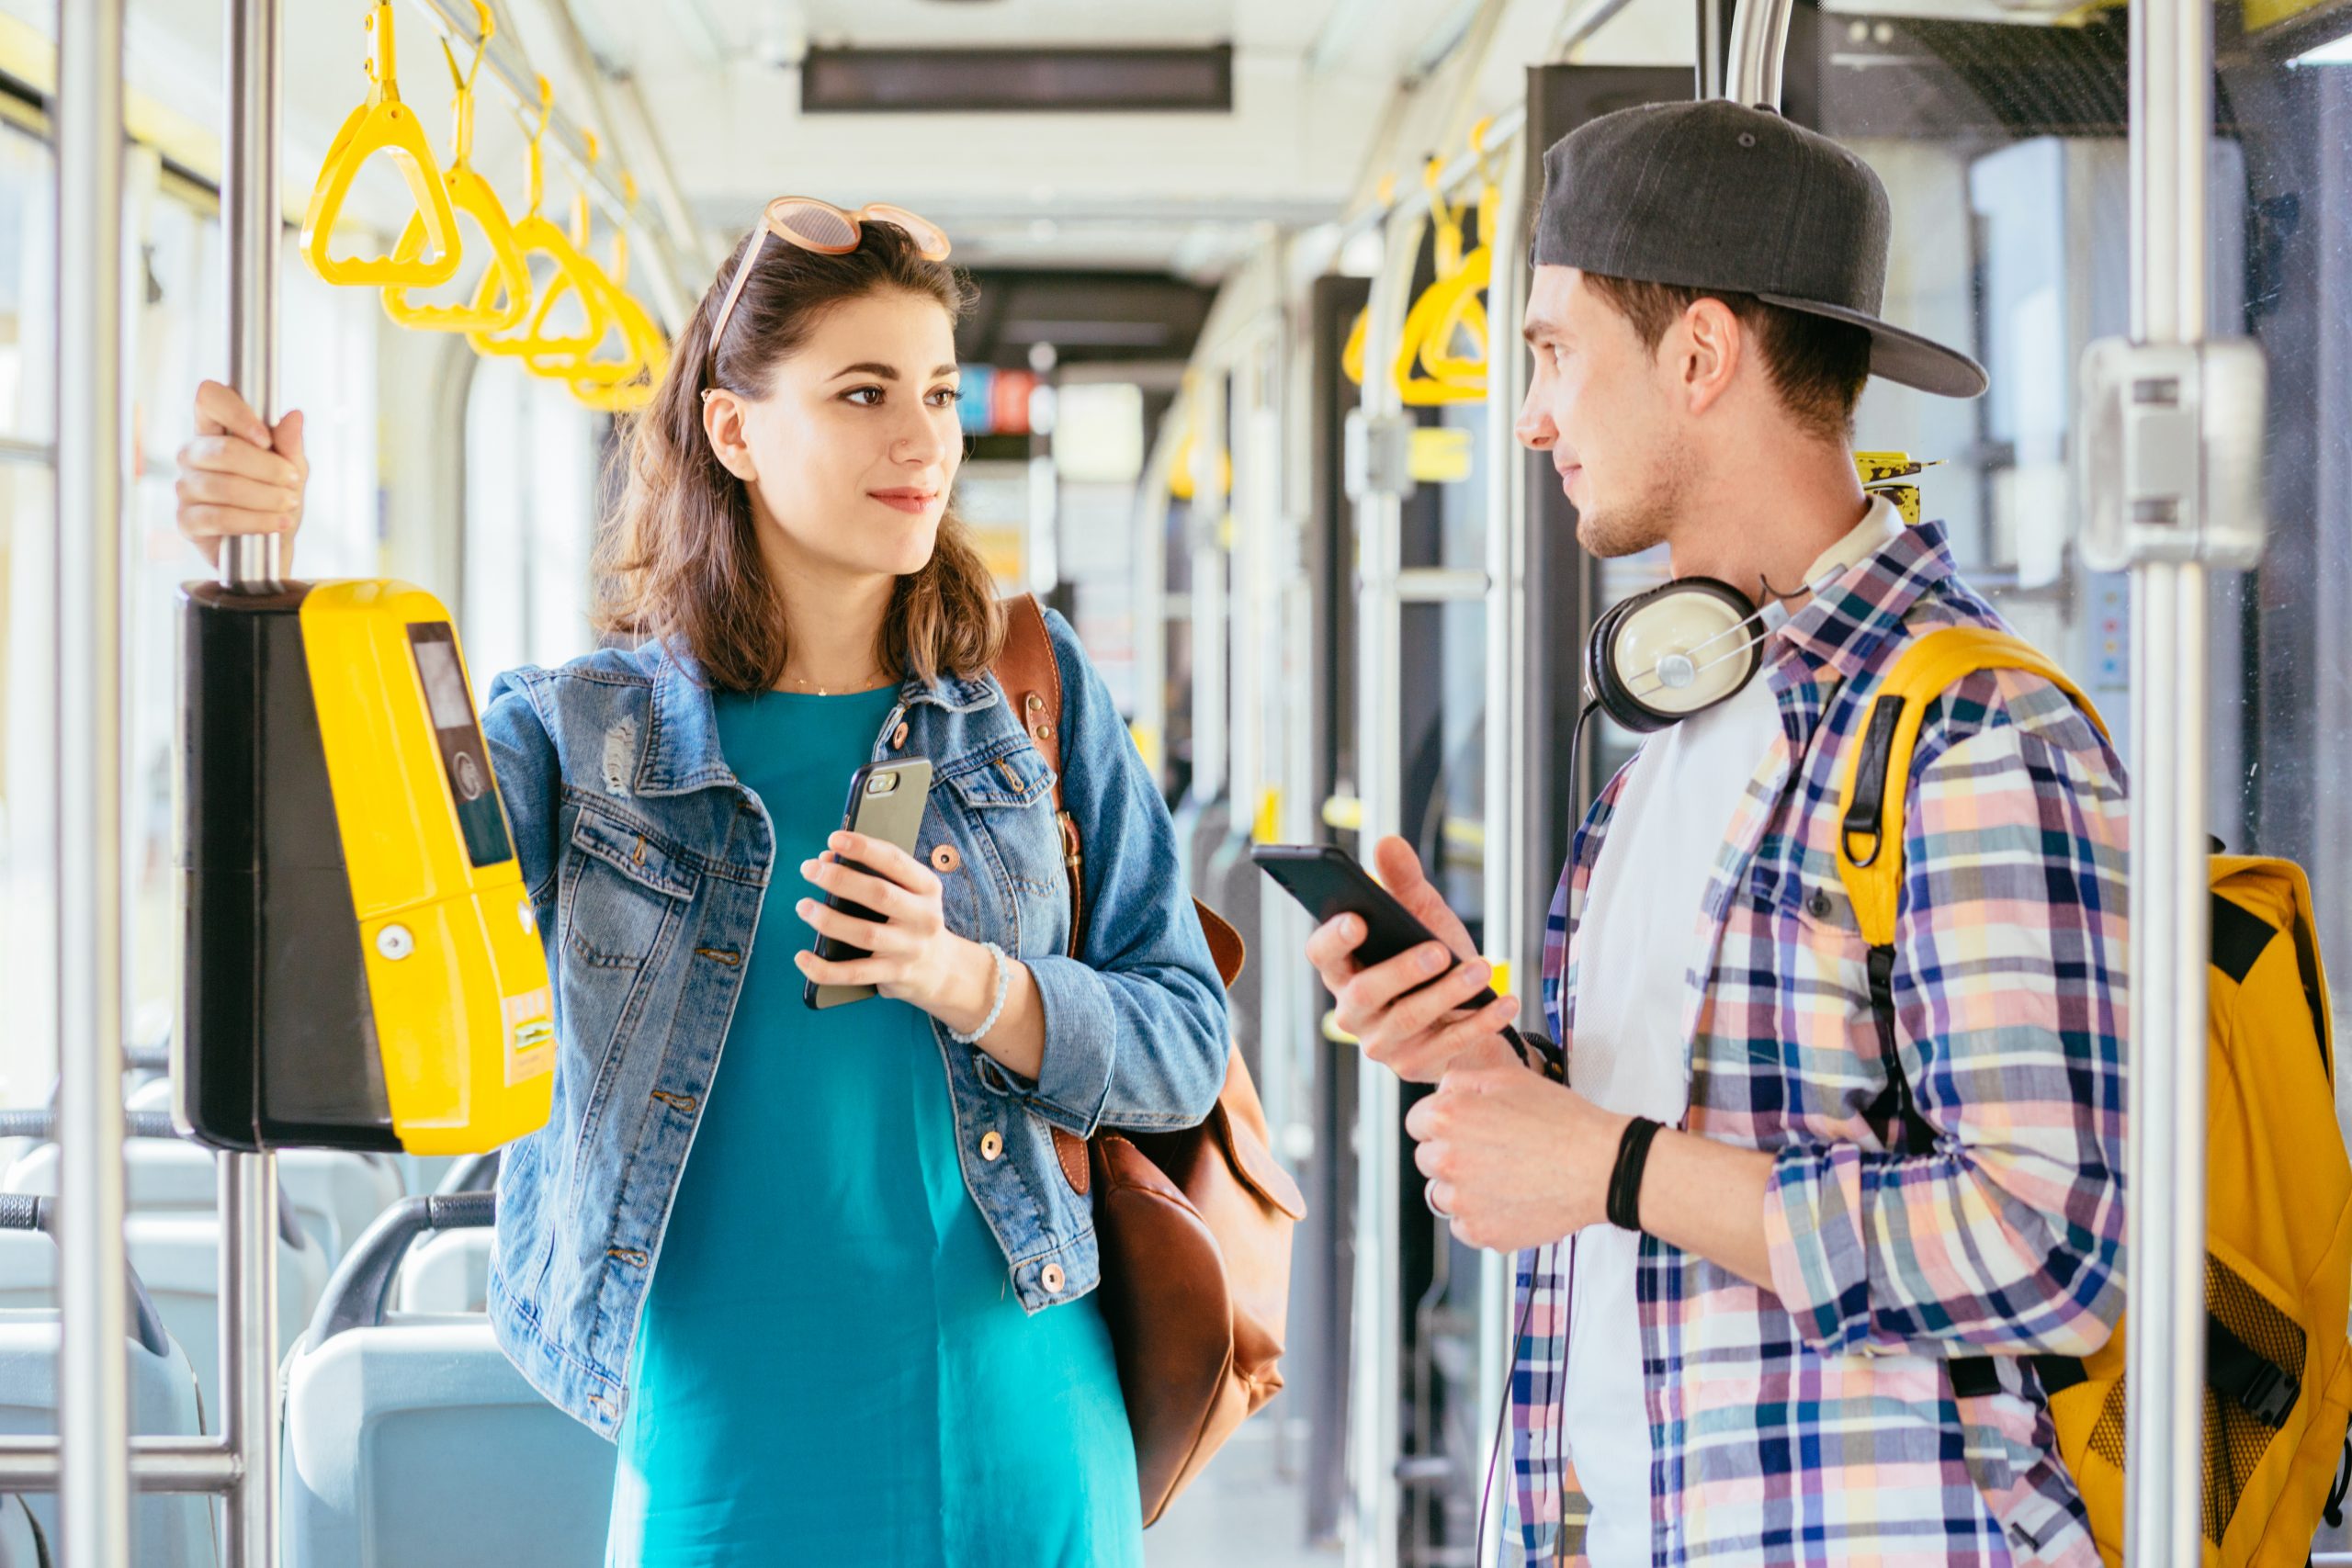 How to become a master at talking to strangers on the bus